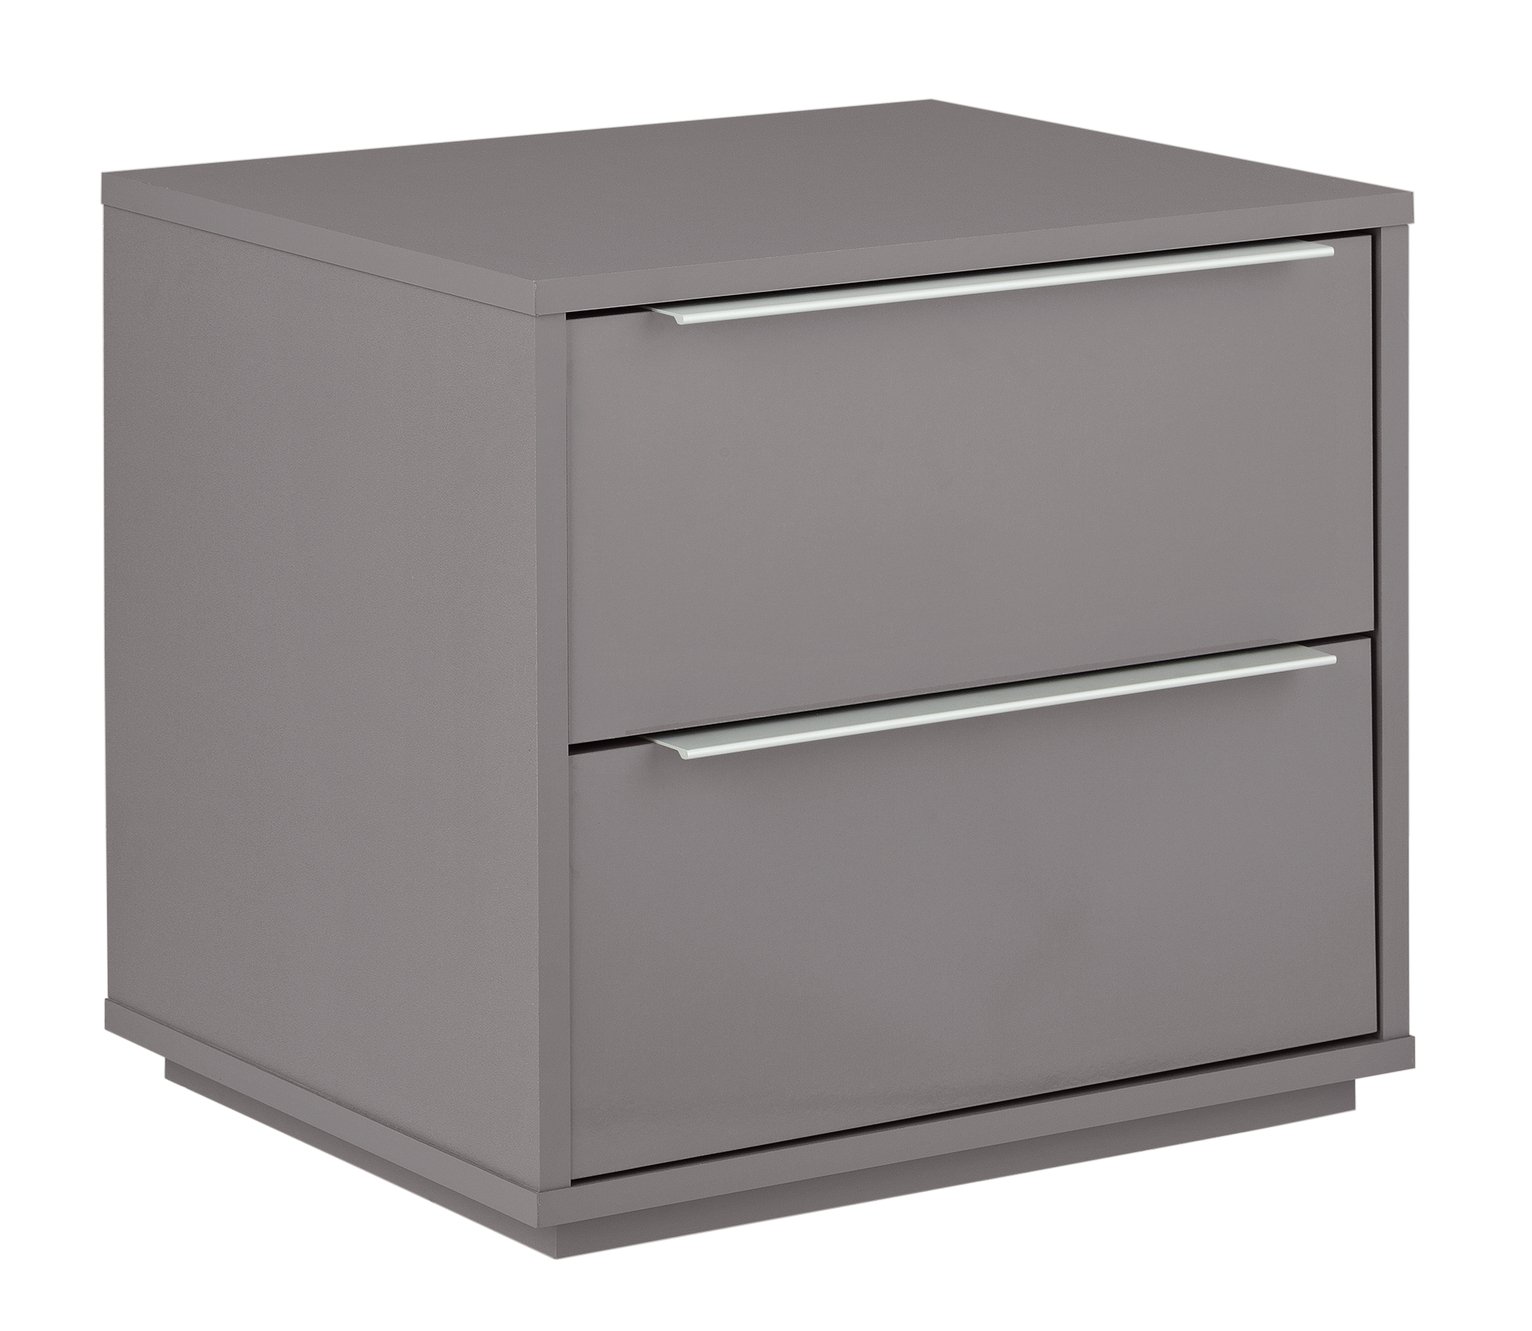 Argos Home Holsted Gloss 2 Drawer Bedside Table - Grey